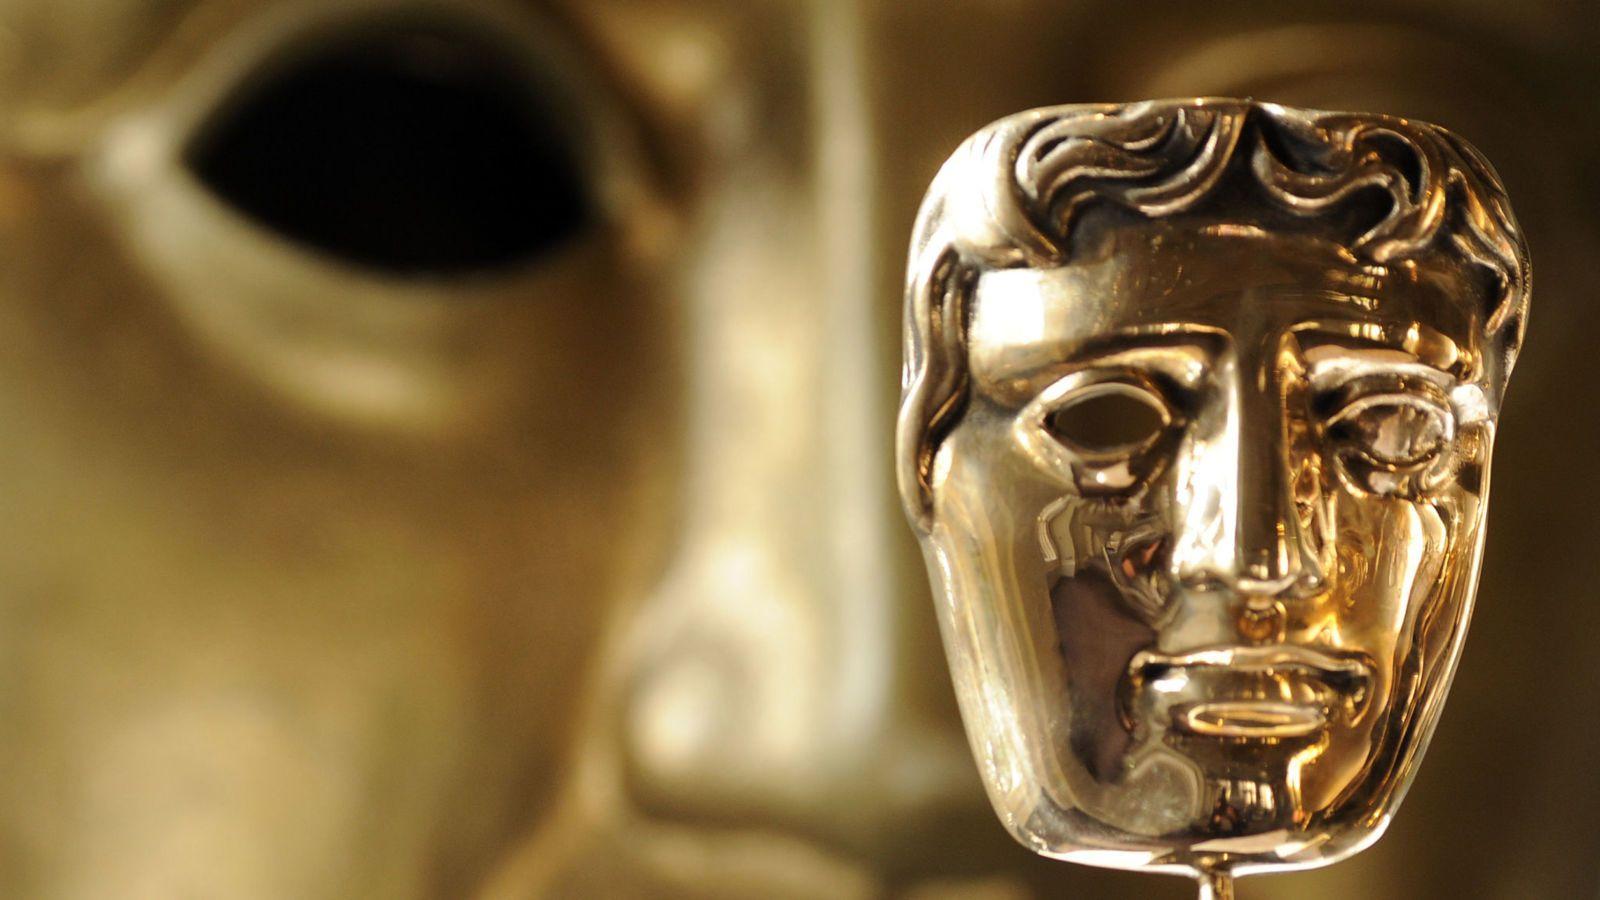 BAFTA Awards 2017: When can I watch and which films are nominated?